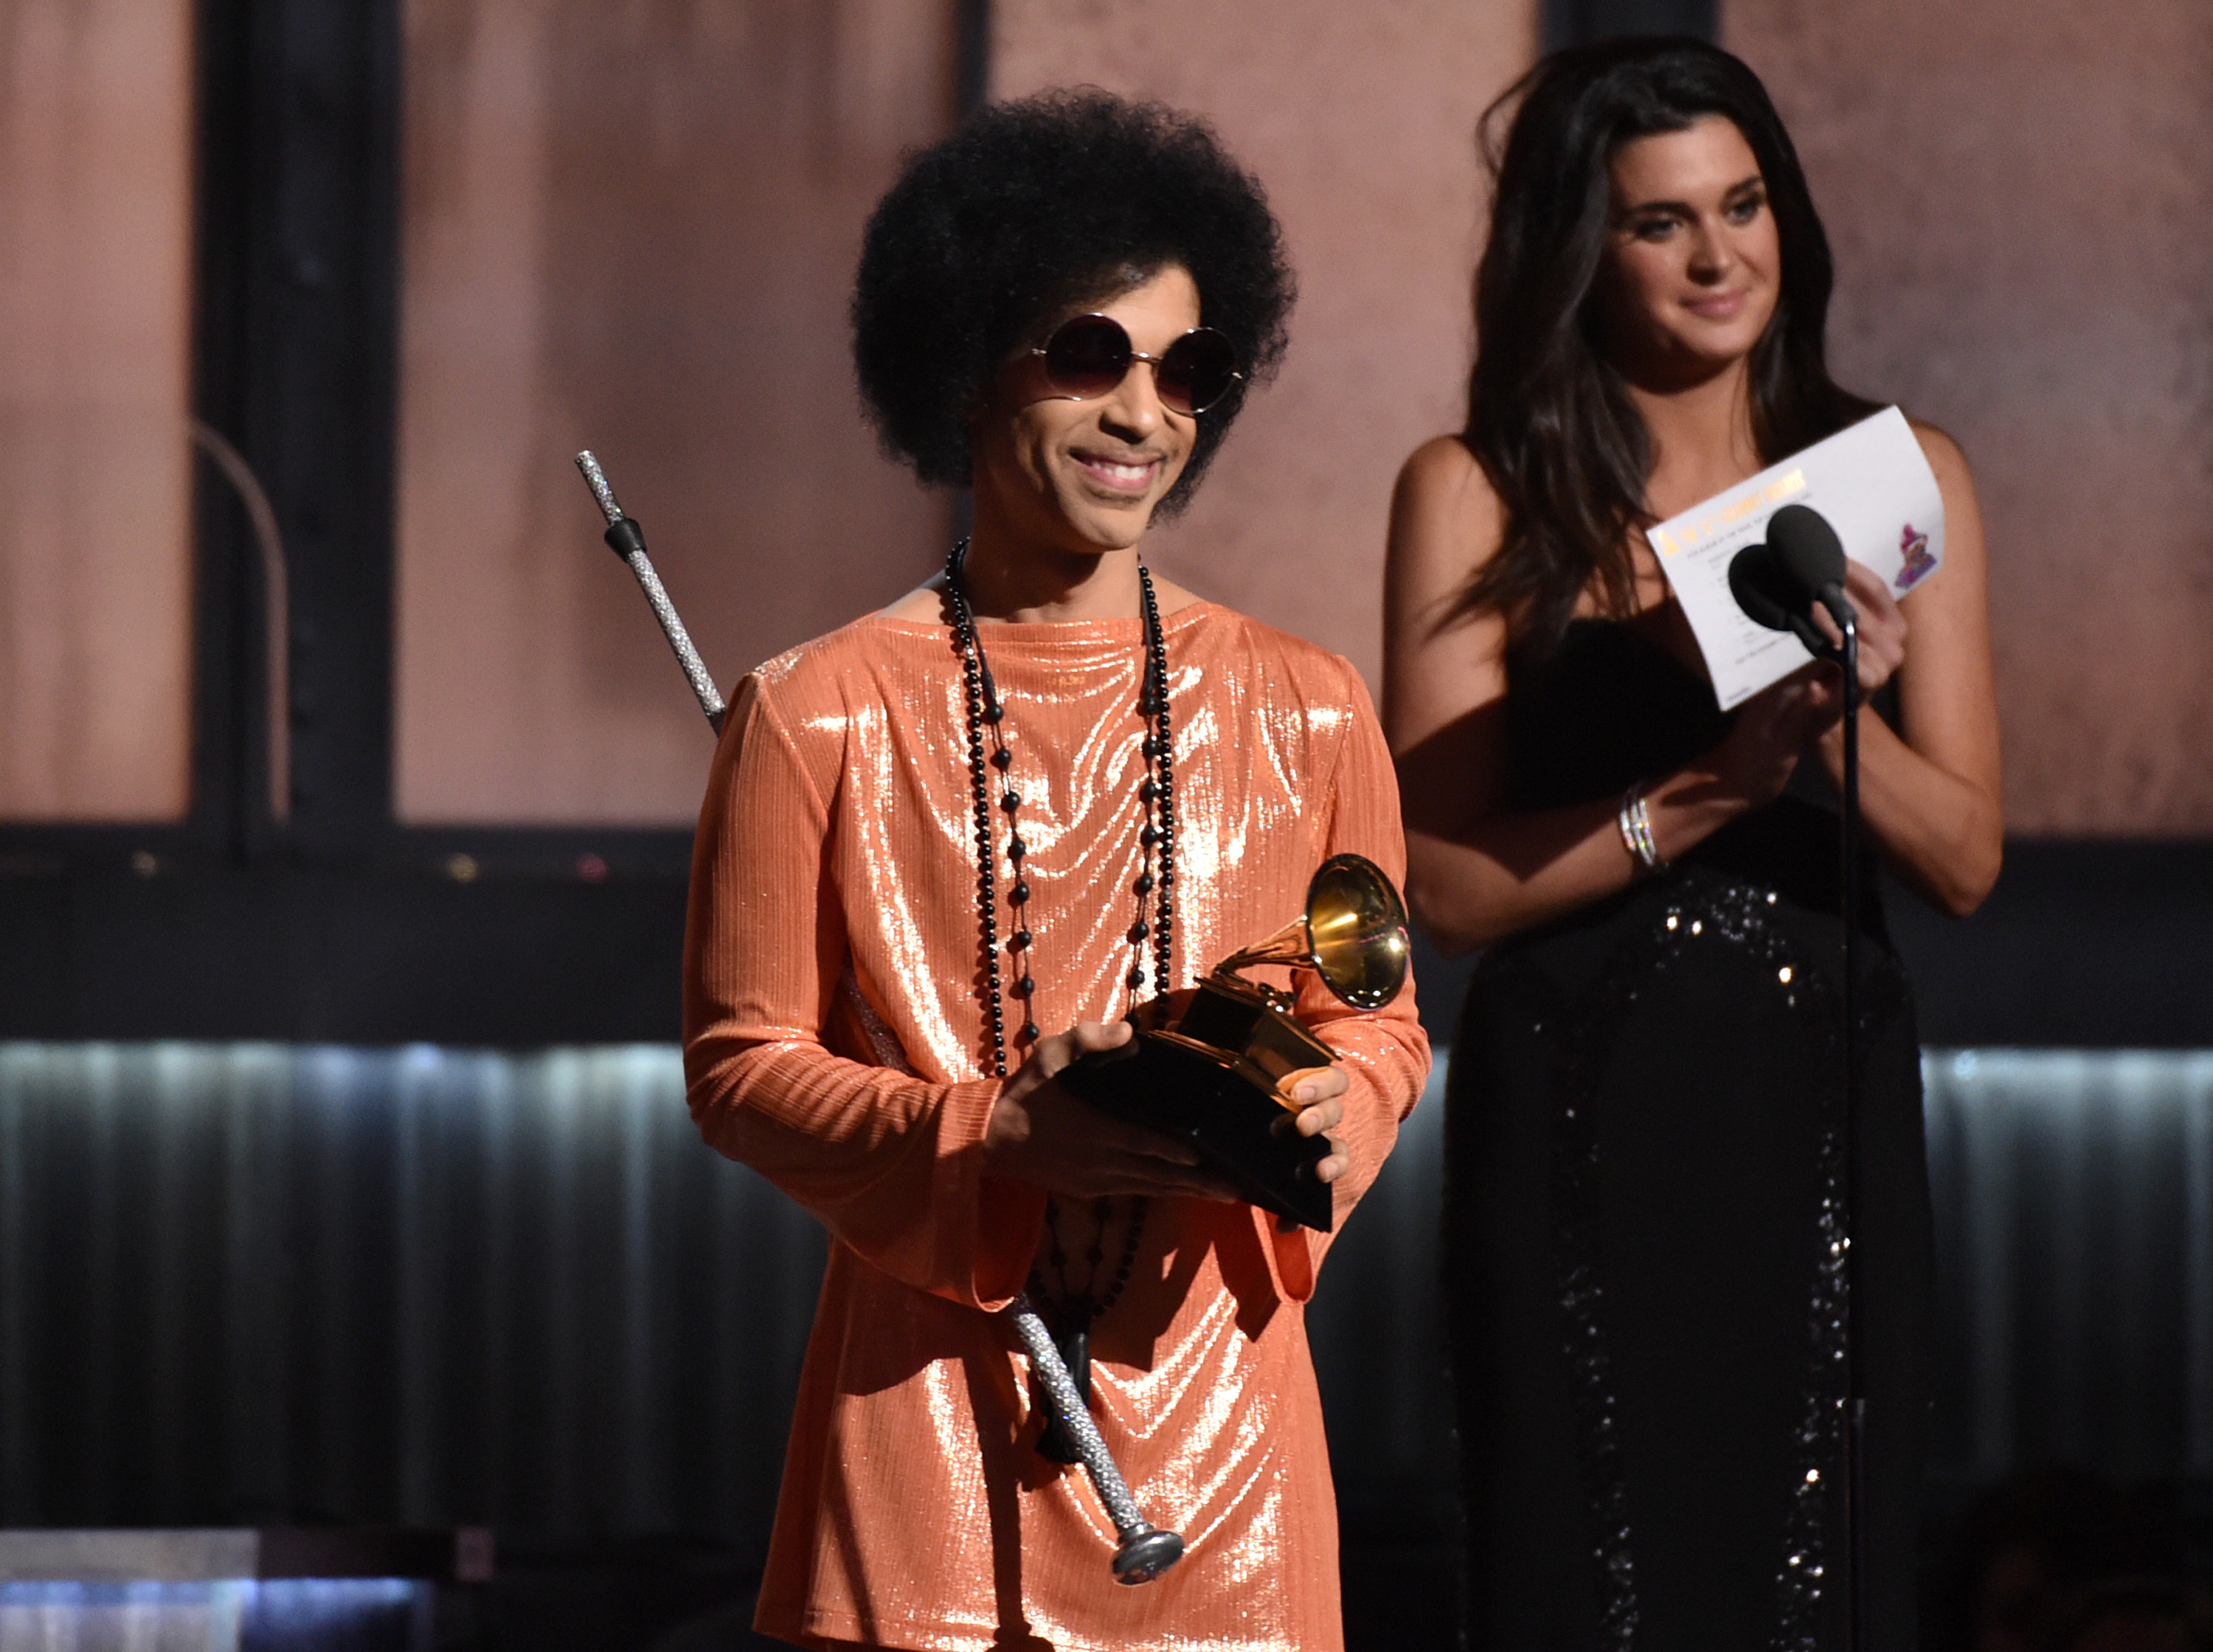  In this Feb. 8, 2015 file photo, Prince presents the award for album of the year at the 57th annual Grammy Awards in Los Angeles.  (Photo by John Shearer/Invision/AP)